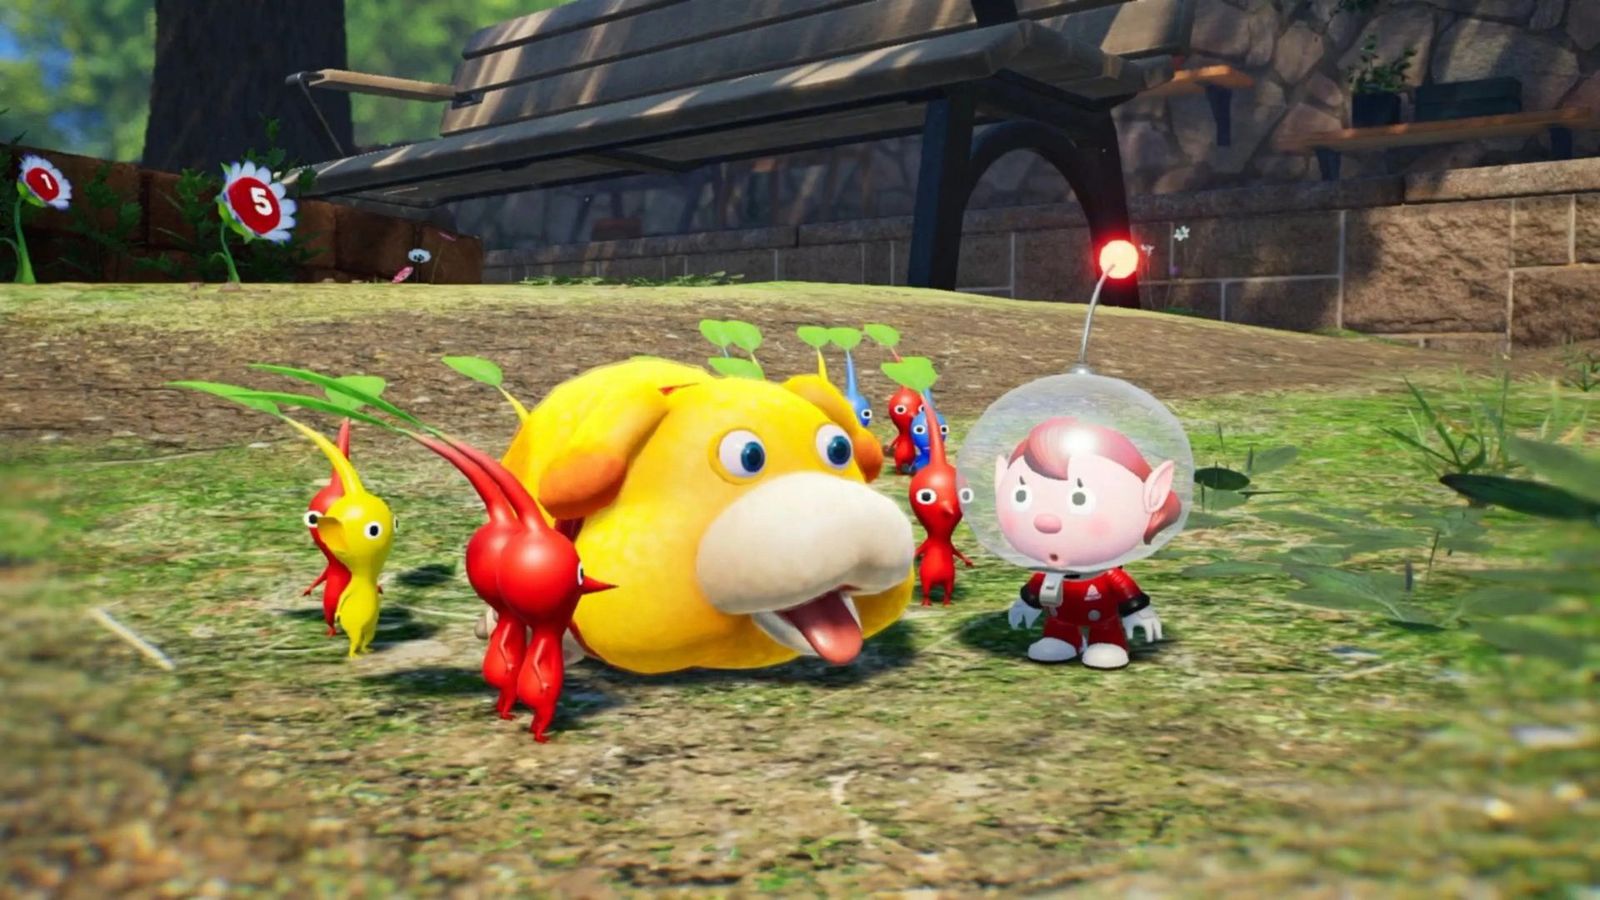 The player character and Pikmin stood around Oatchi in Pikmin 4.